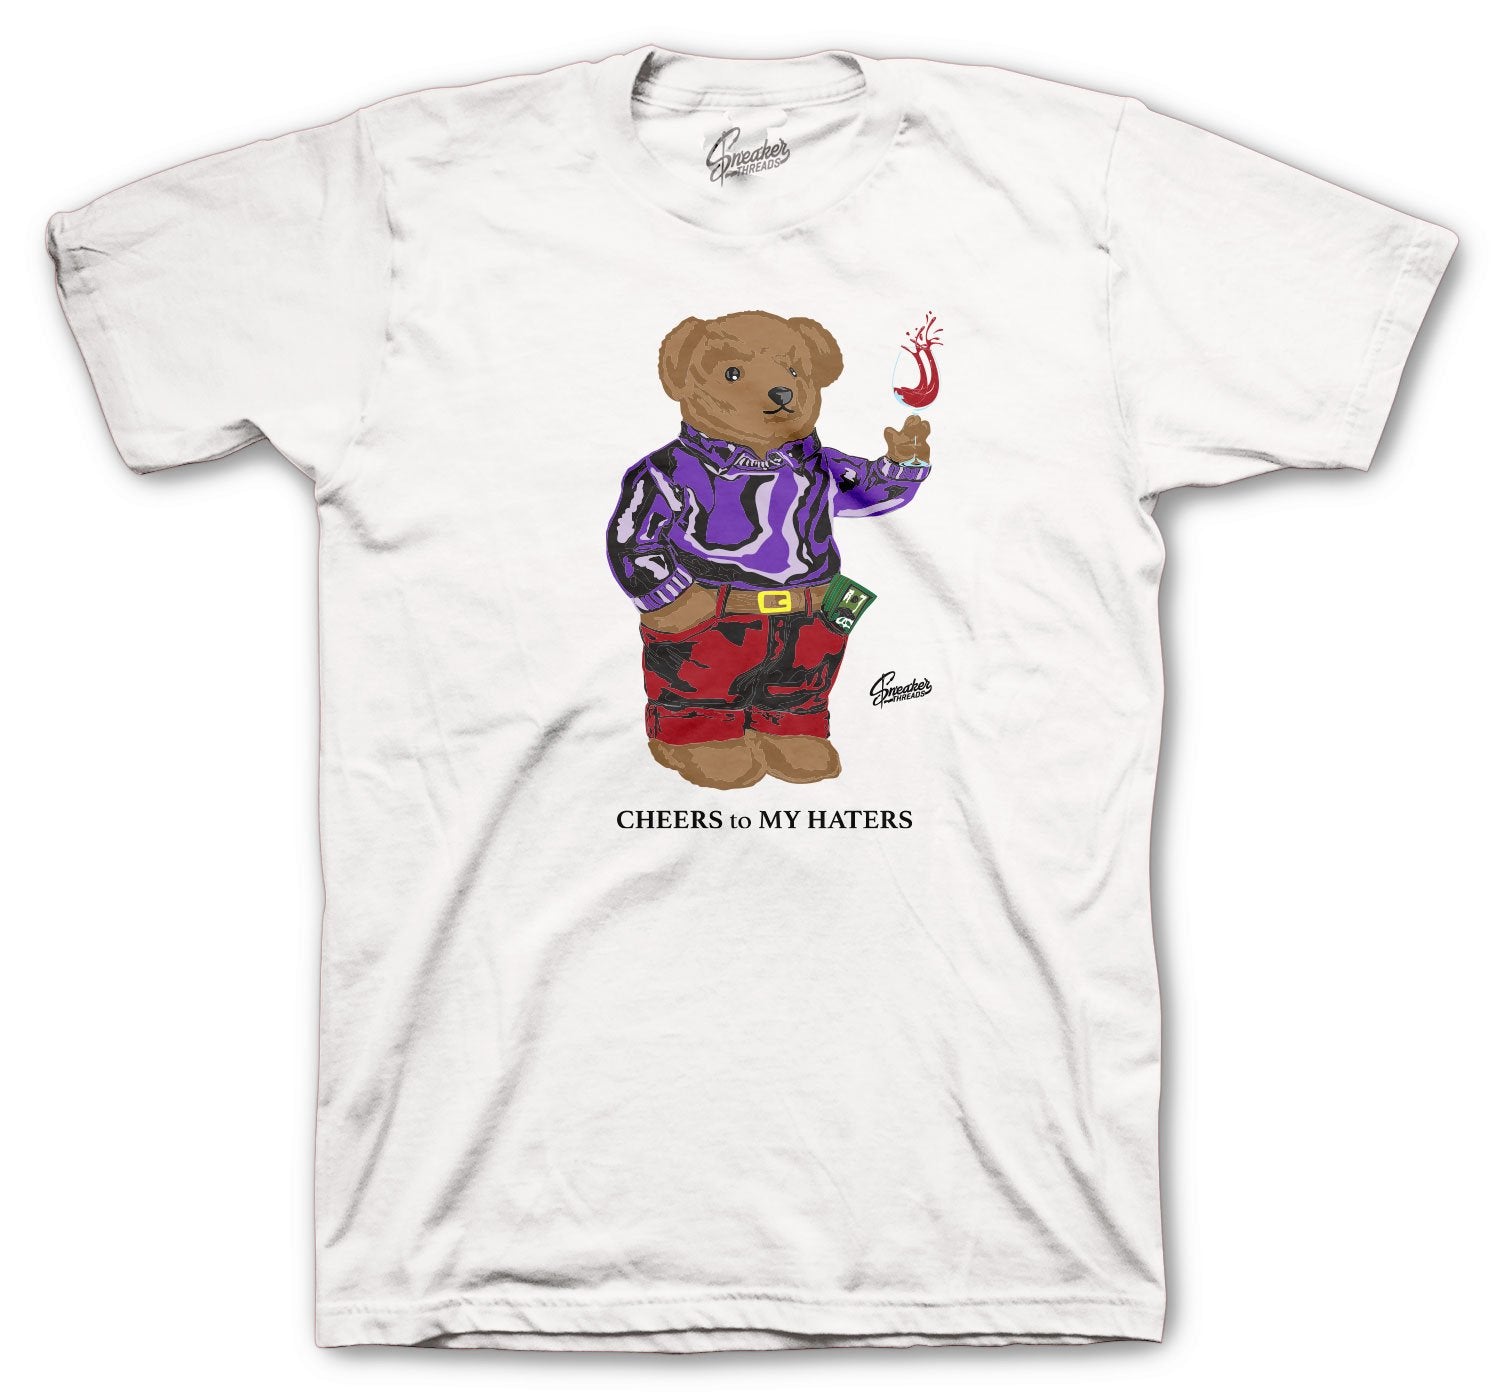 Plum SB Dunk sneaker collection matching perfectly with guys t shirts collection 